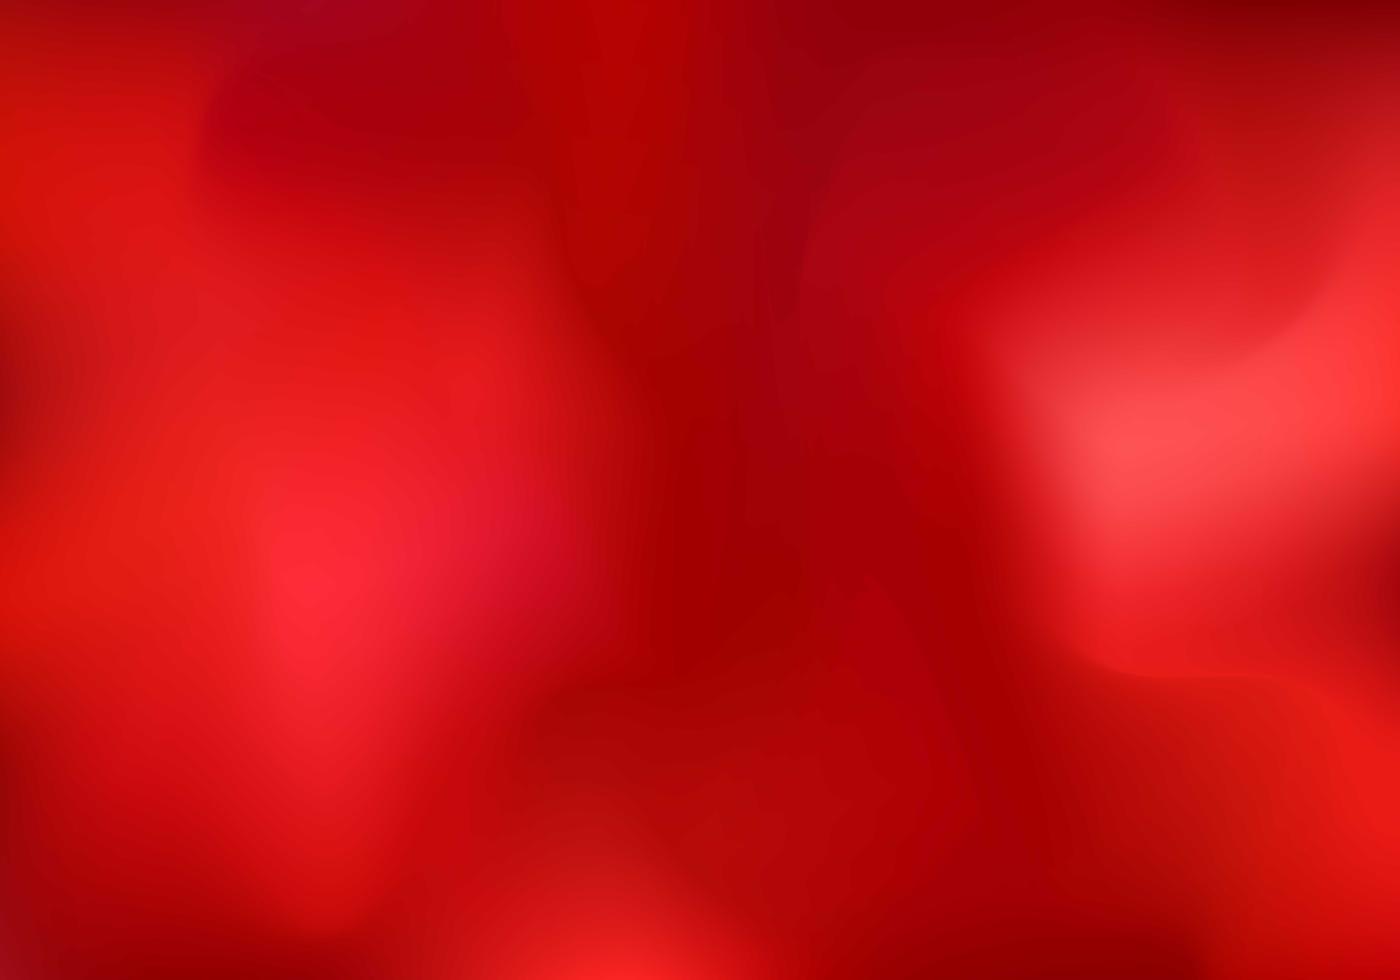 Abstract red cloud or smoke background. Blurred gradient horizontal You can use for wallpaper, banner web, presentation, brochure, poster, ad, etc